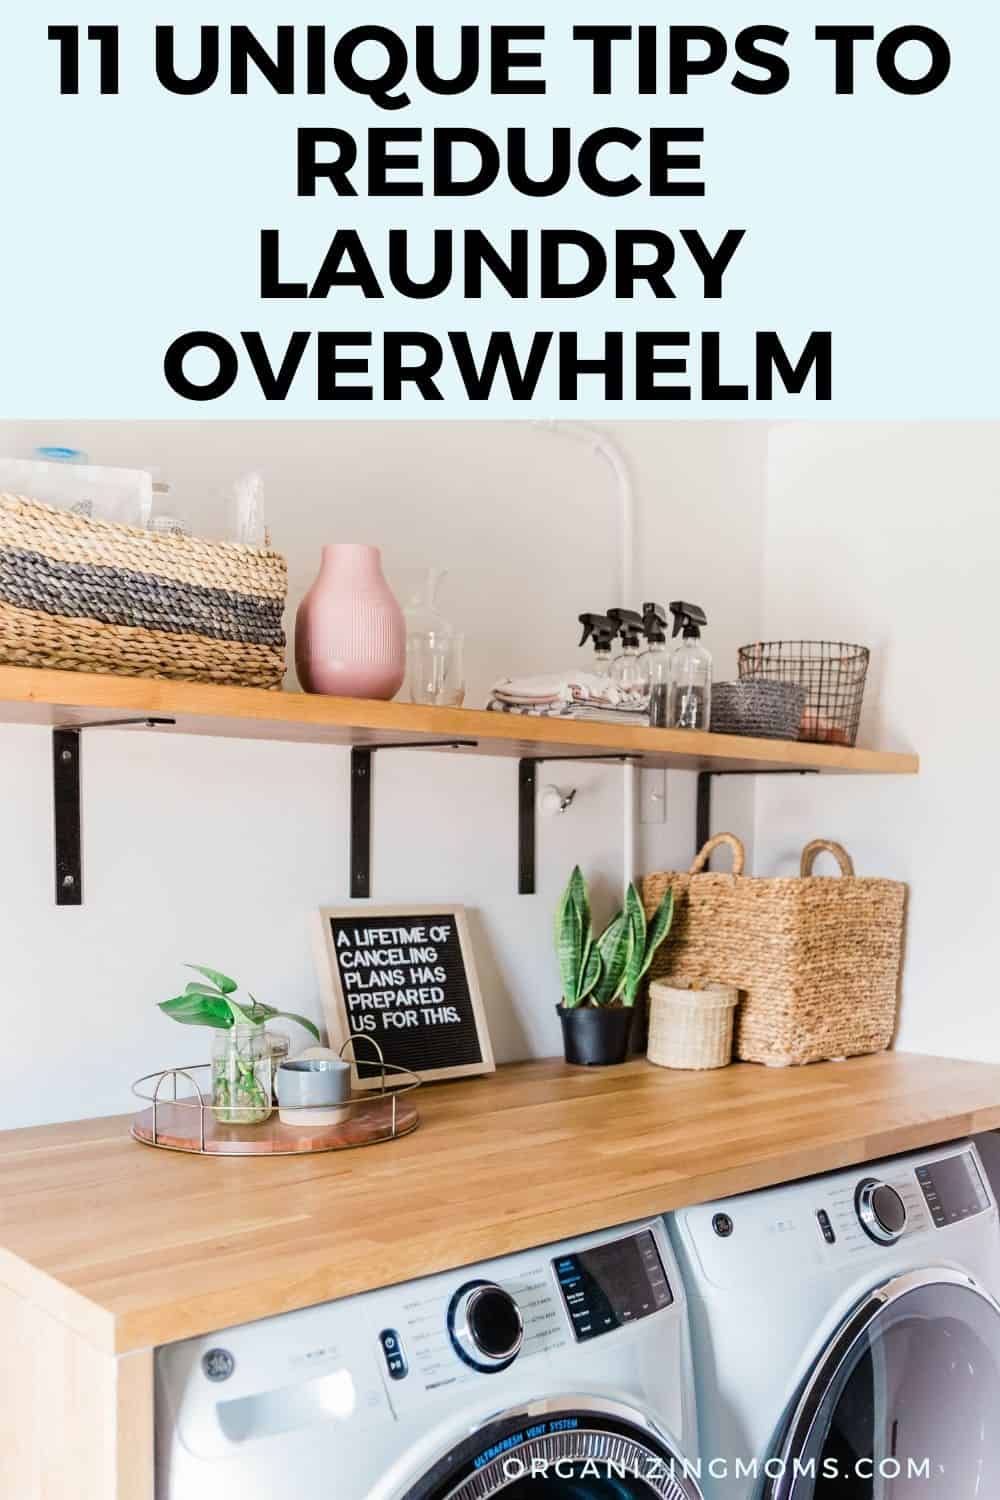 text - 11 unique tips to reduce laundry overwhelm image - washer and dryer with wood shelving above